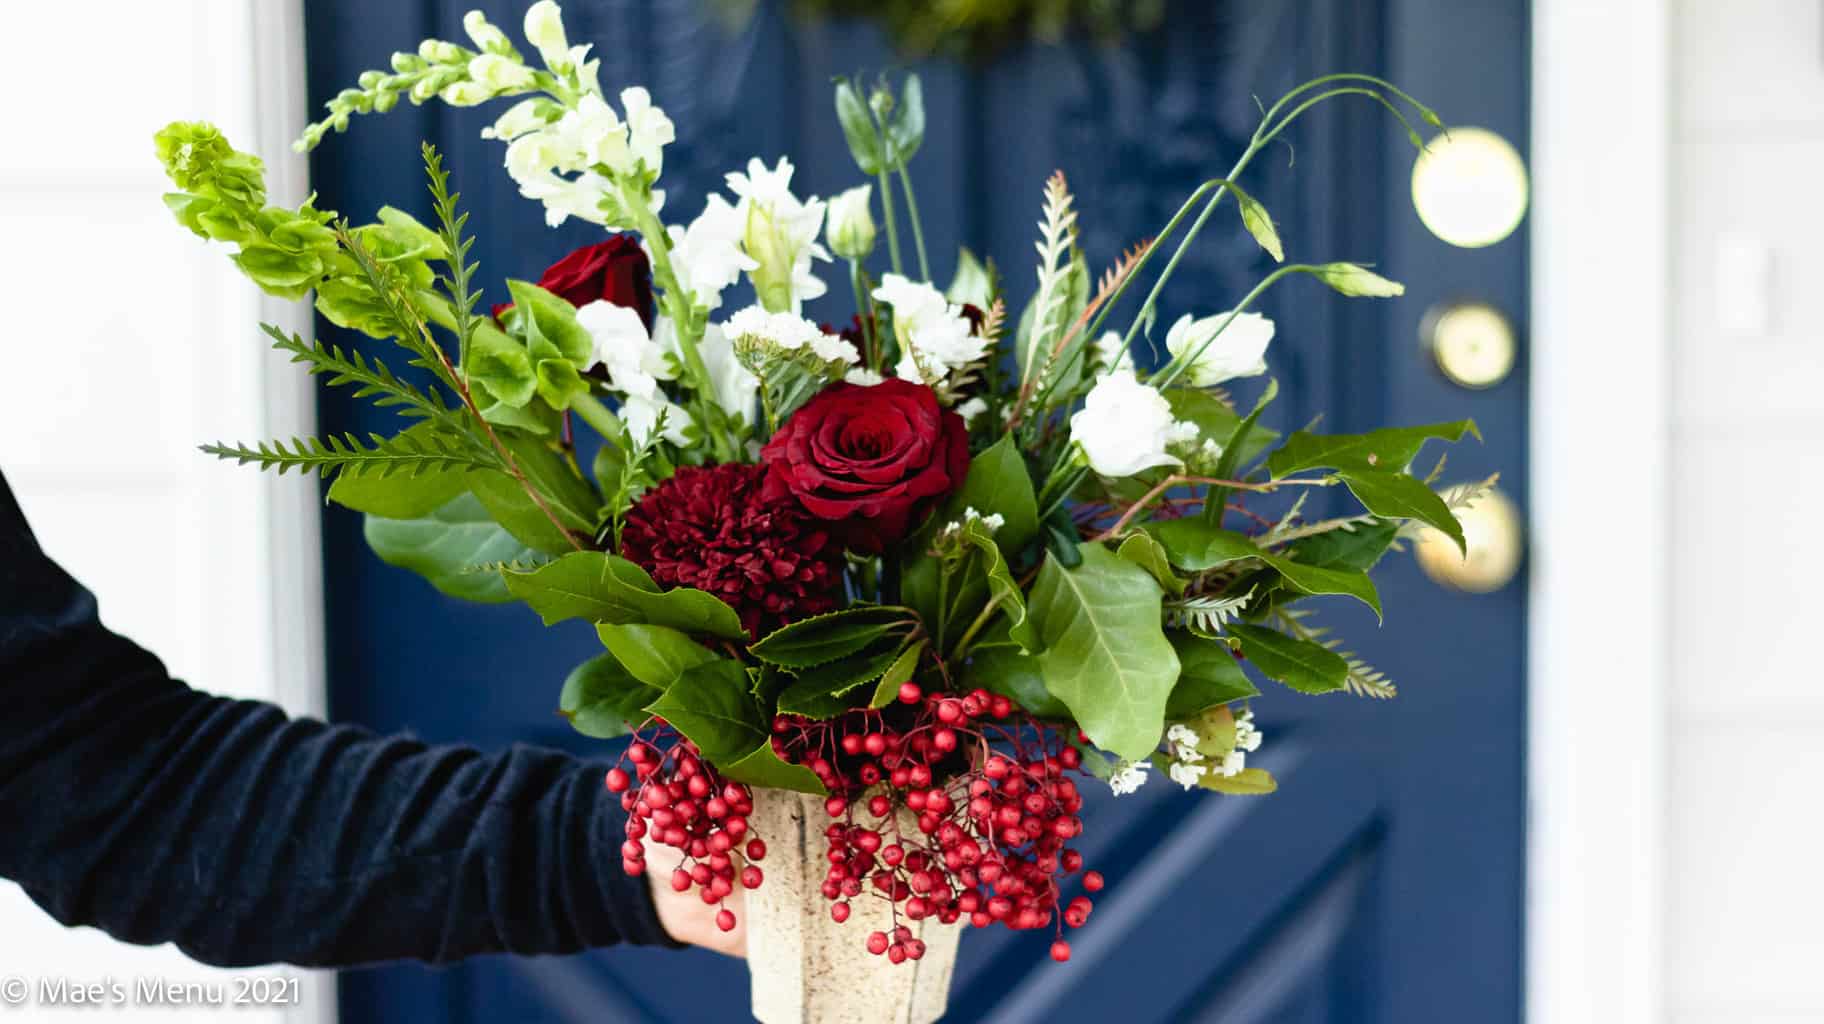 A hand holding a bouquet of Christmas flowers in front of a blue door.